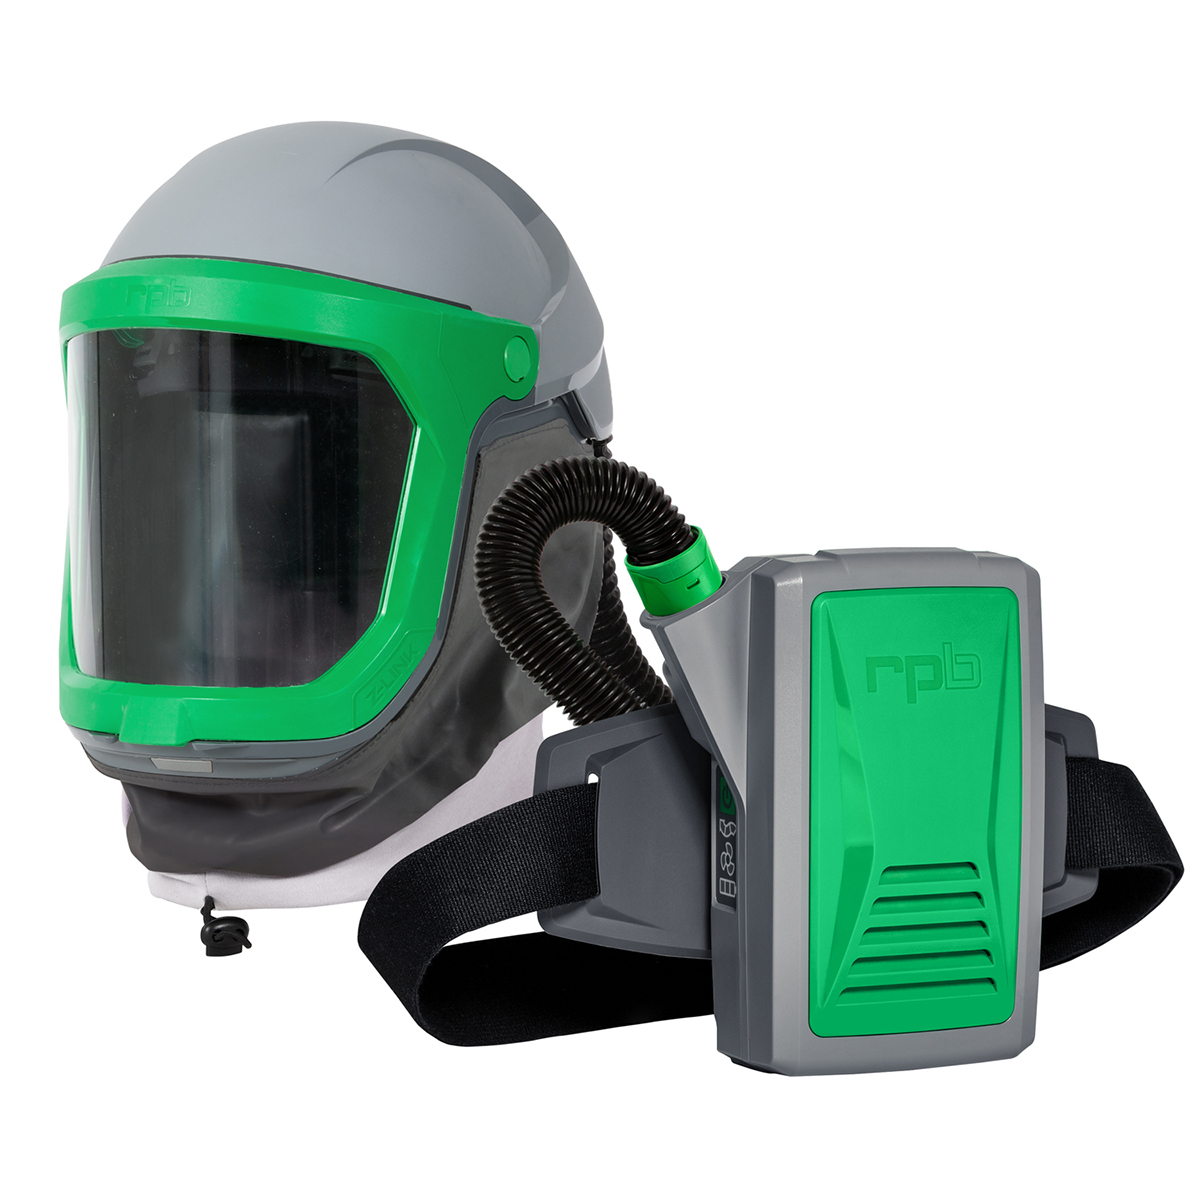 RPB® Z-Link® Medium Heavy Industry/Healthcare Powered Air Purifying Respirator Kit With Zytec® FR Face Seal, Breathing Tube, And